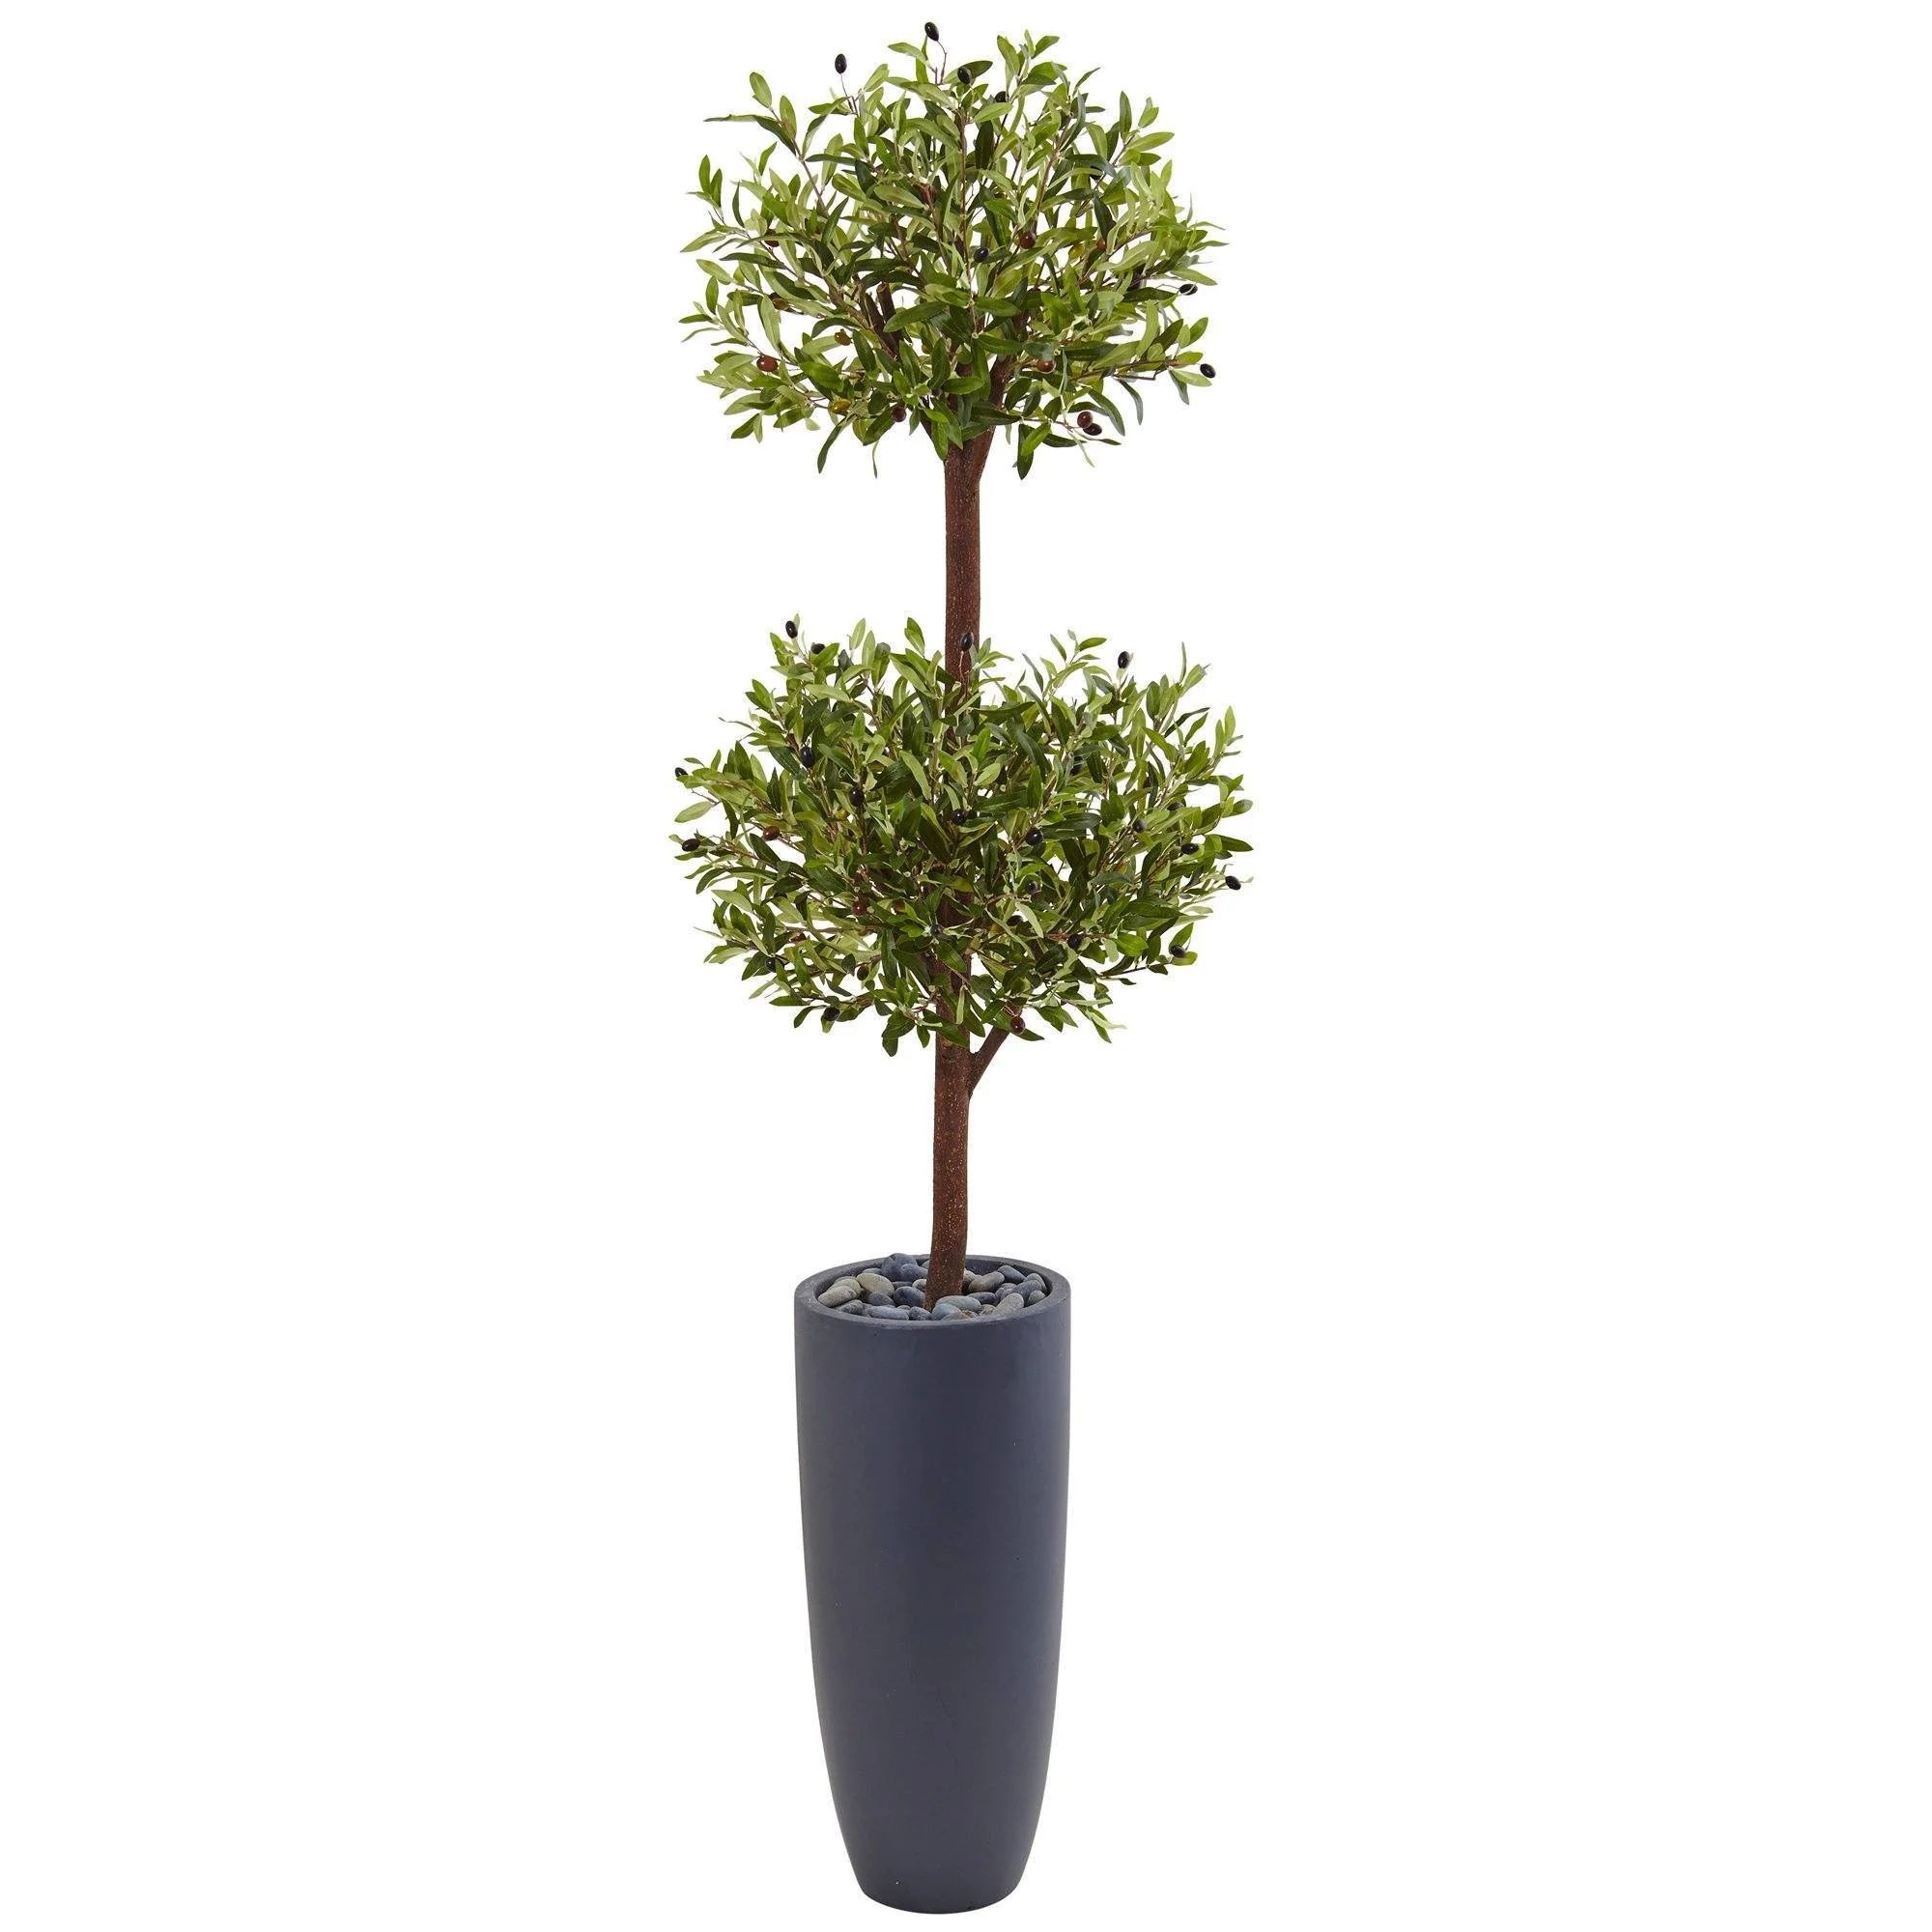 6’ Olive Double Tree in Gray Cylinder Planter | Nearly Natural | Nearly Natural